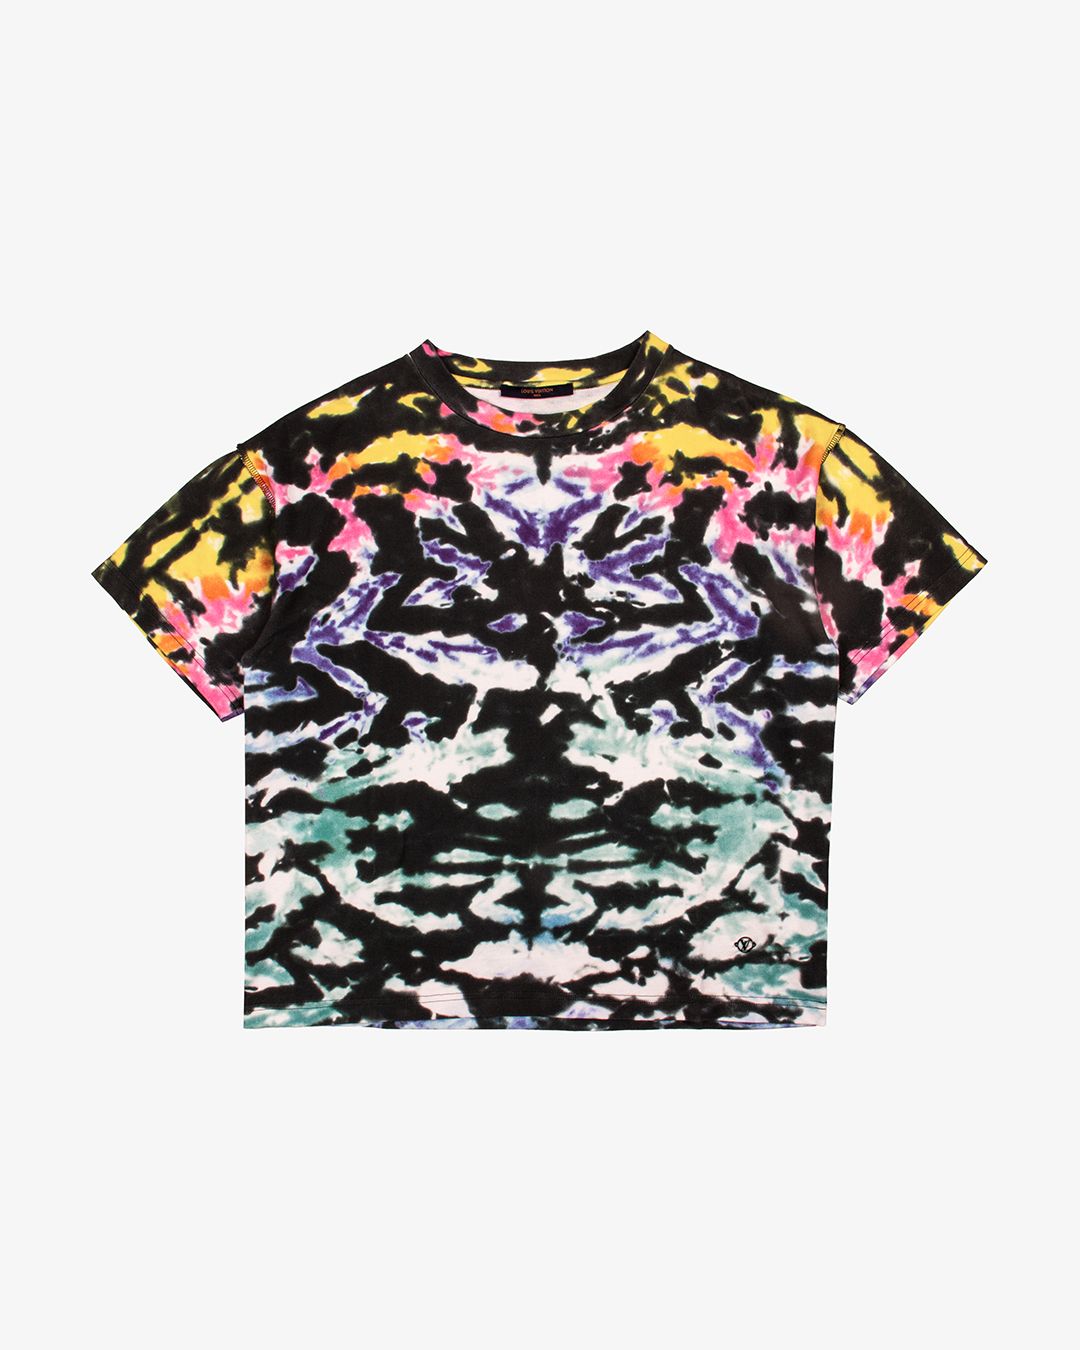 LOUIS VUITTON 2019SS RM191 JYN HGY78W Tie dye T-Shirt S Multicolor Auth Men  Used